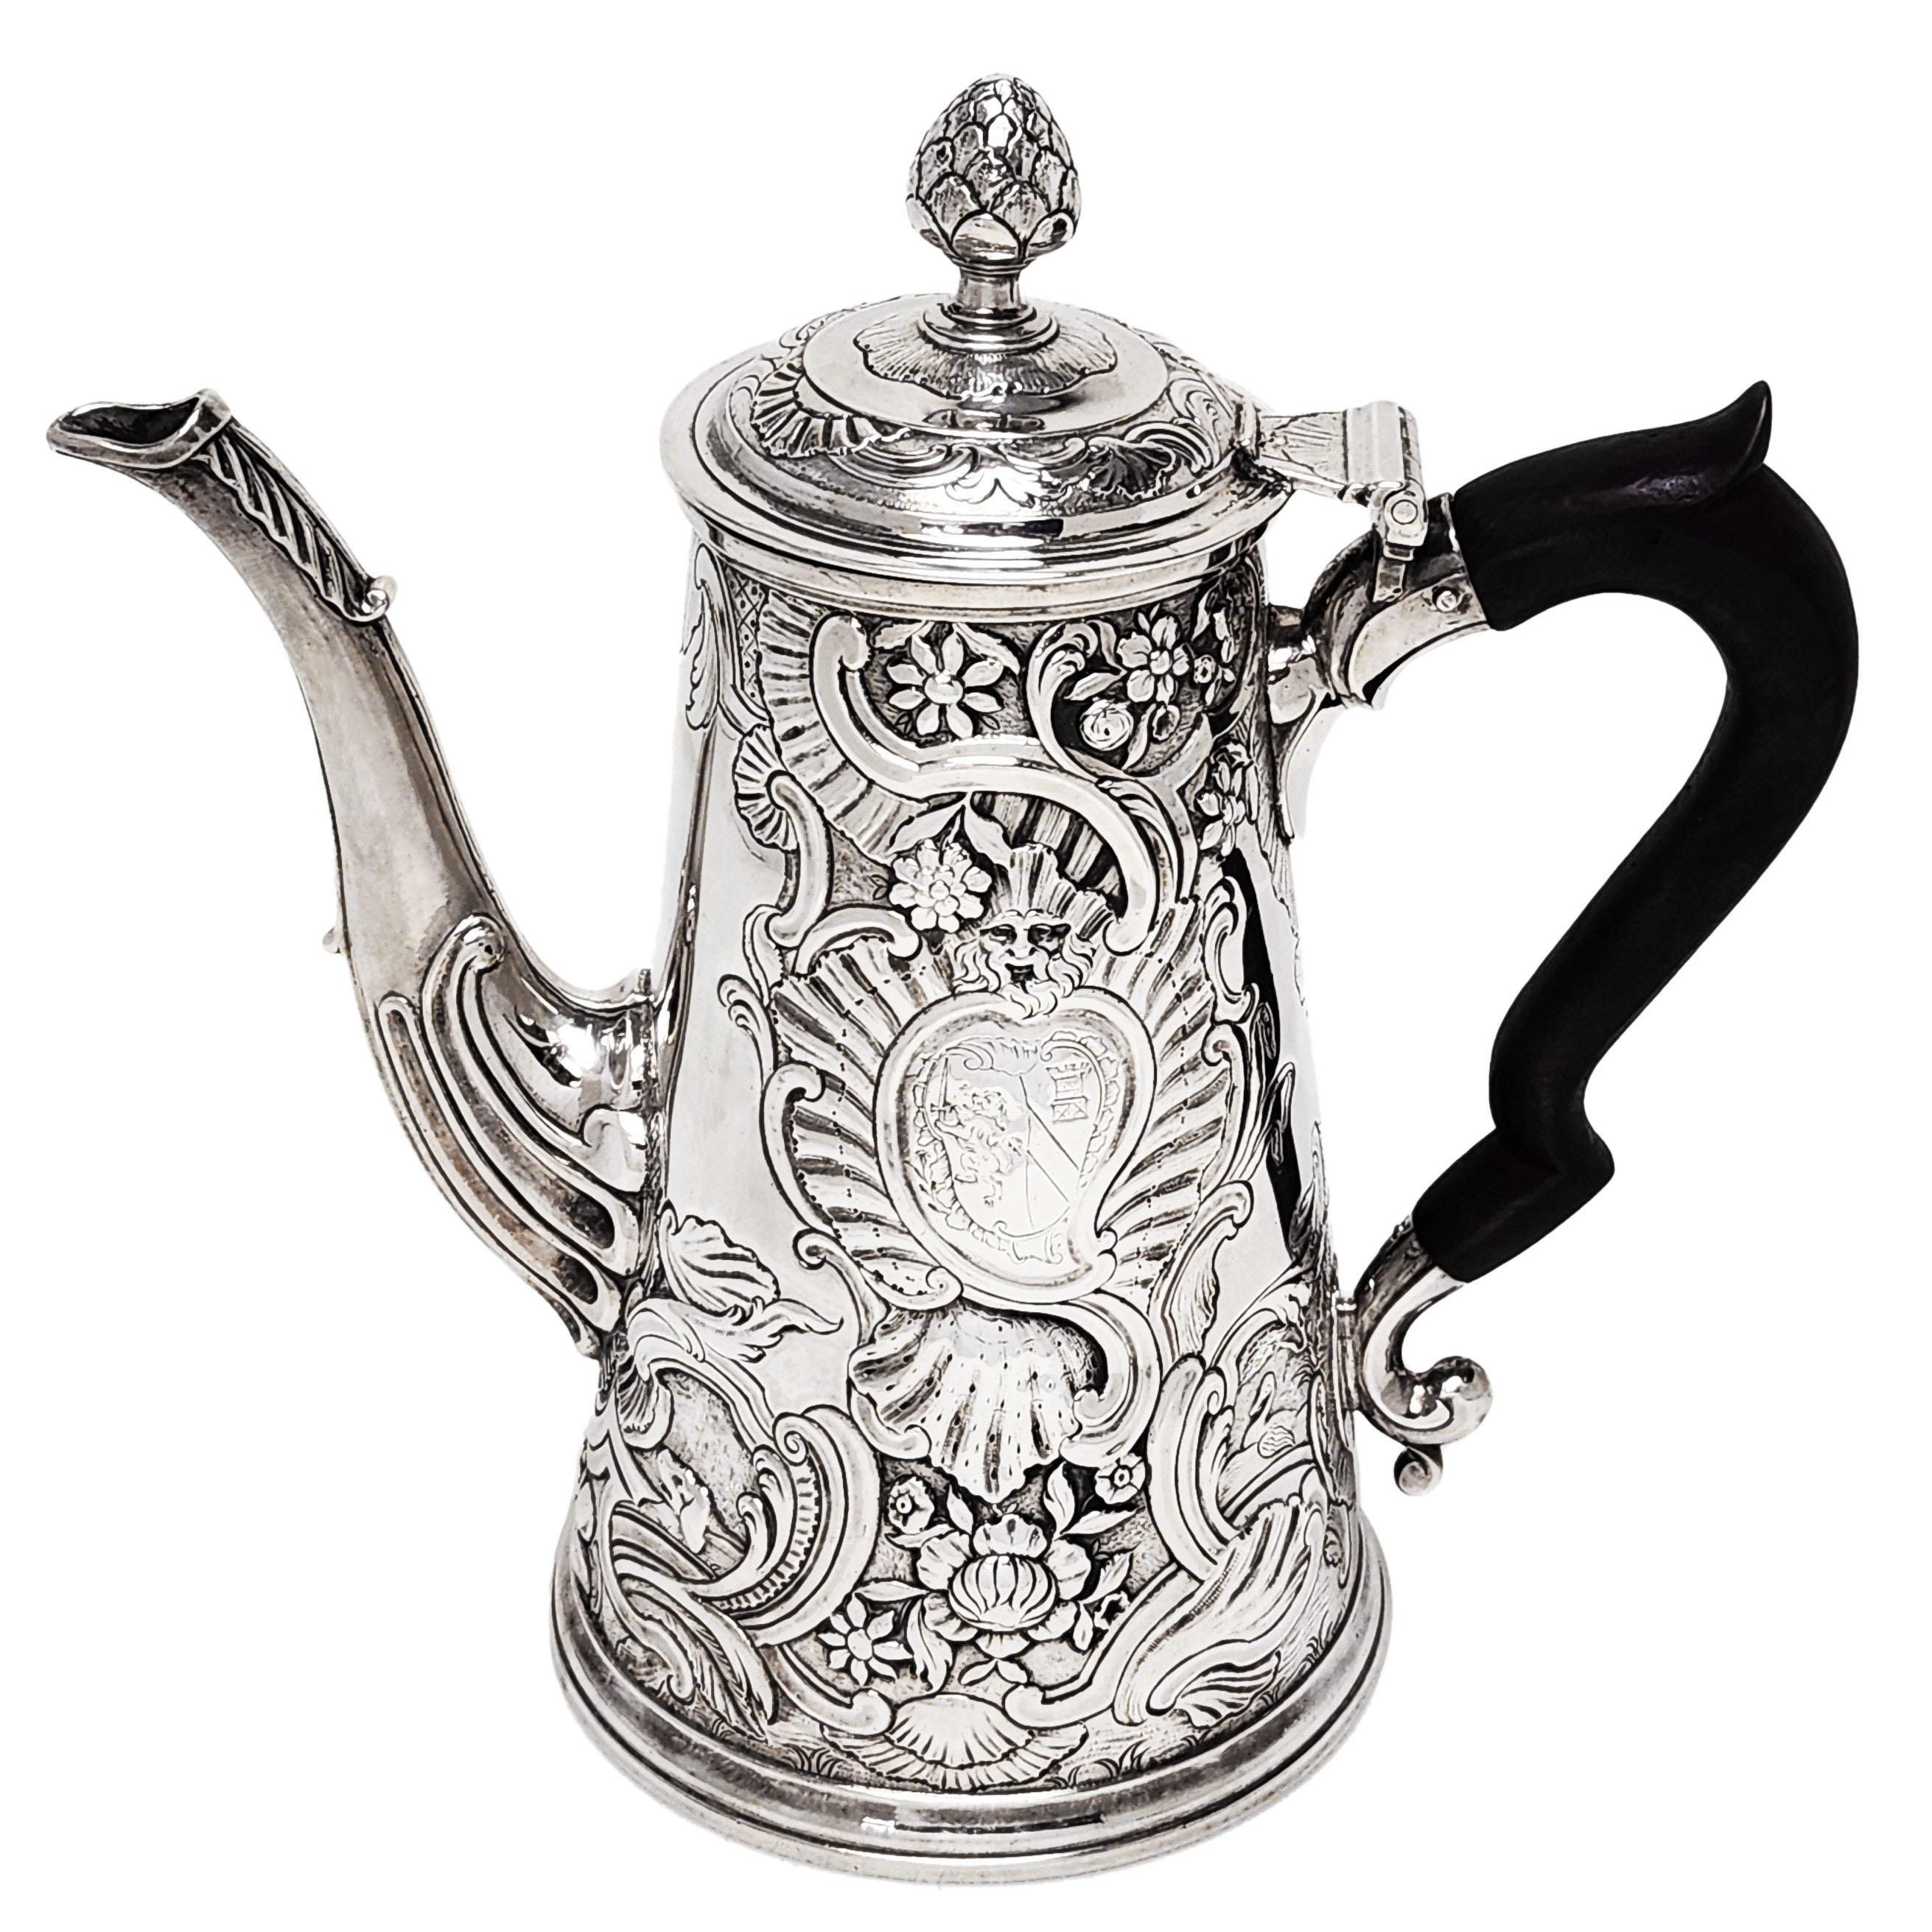 An impressive Antique Irish Rococo Silver Coffee Pot with an ornate chased design embellishing the body, lid and spout of the kettle. Each side of the kettle shows an engraved cartouche, one with an armorial and one with a crest. The chased designs